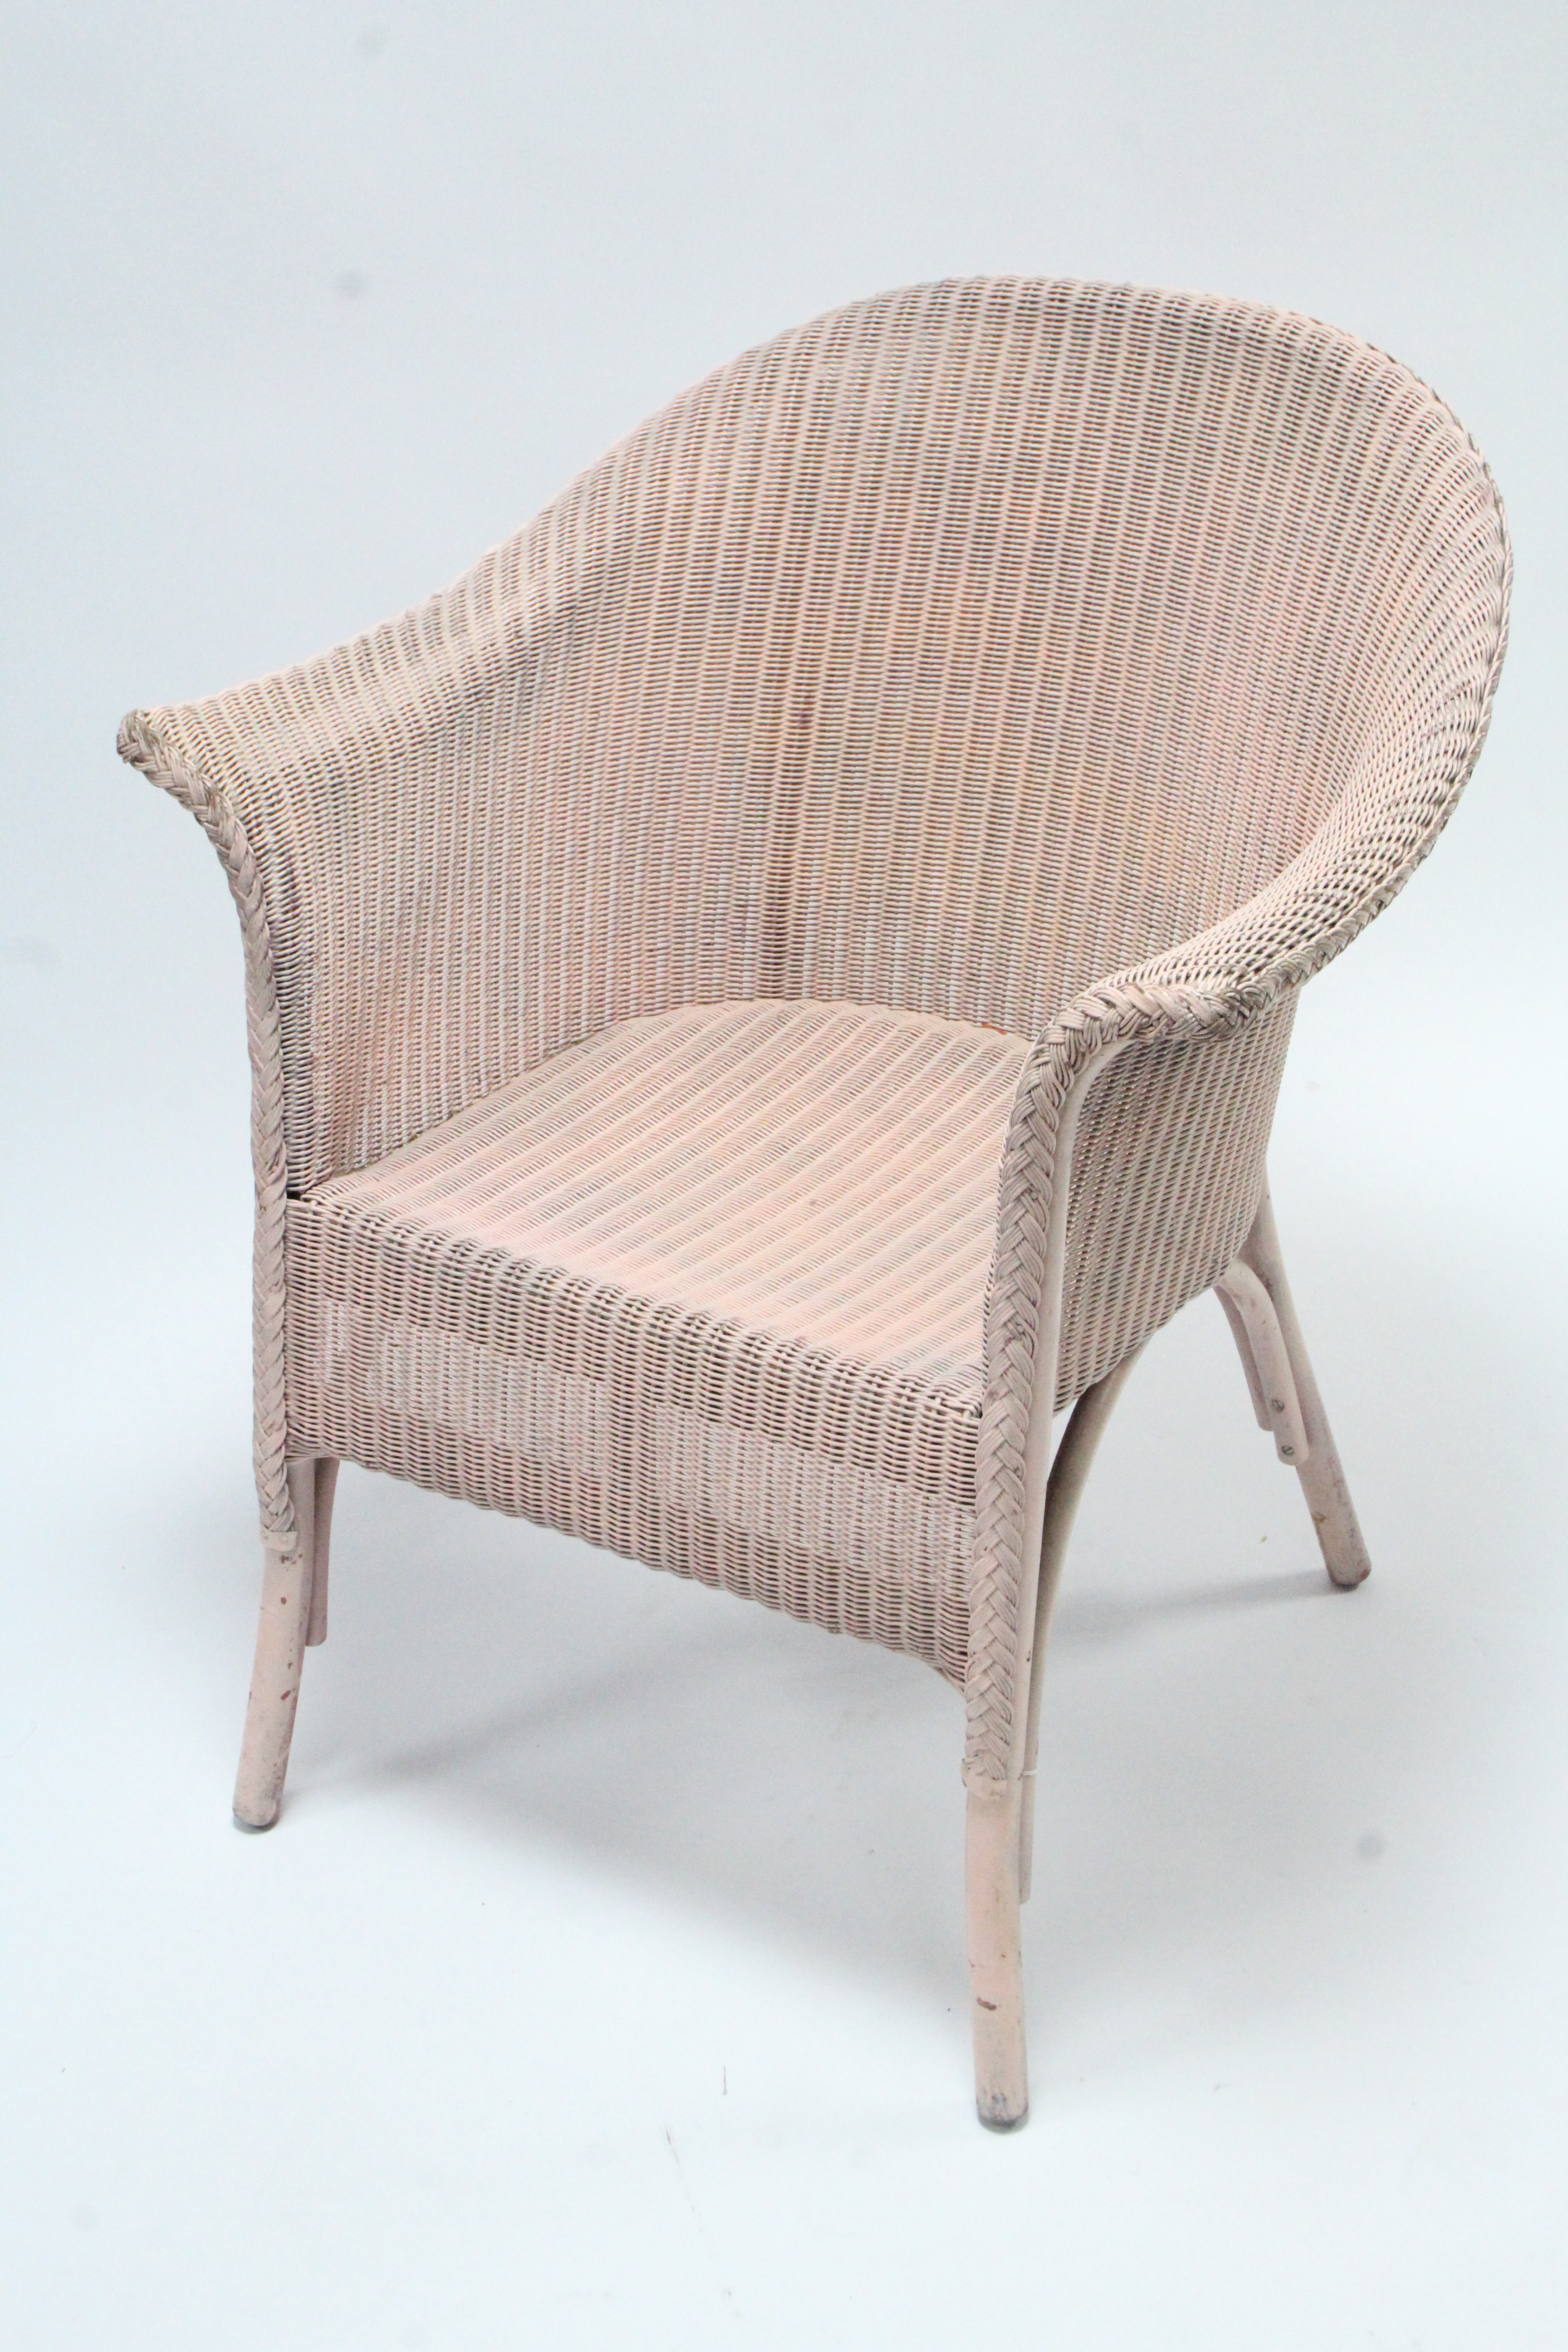 A 1940’s pink painted Lloyd Loom chair.